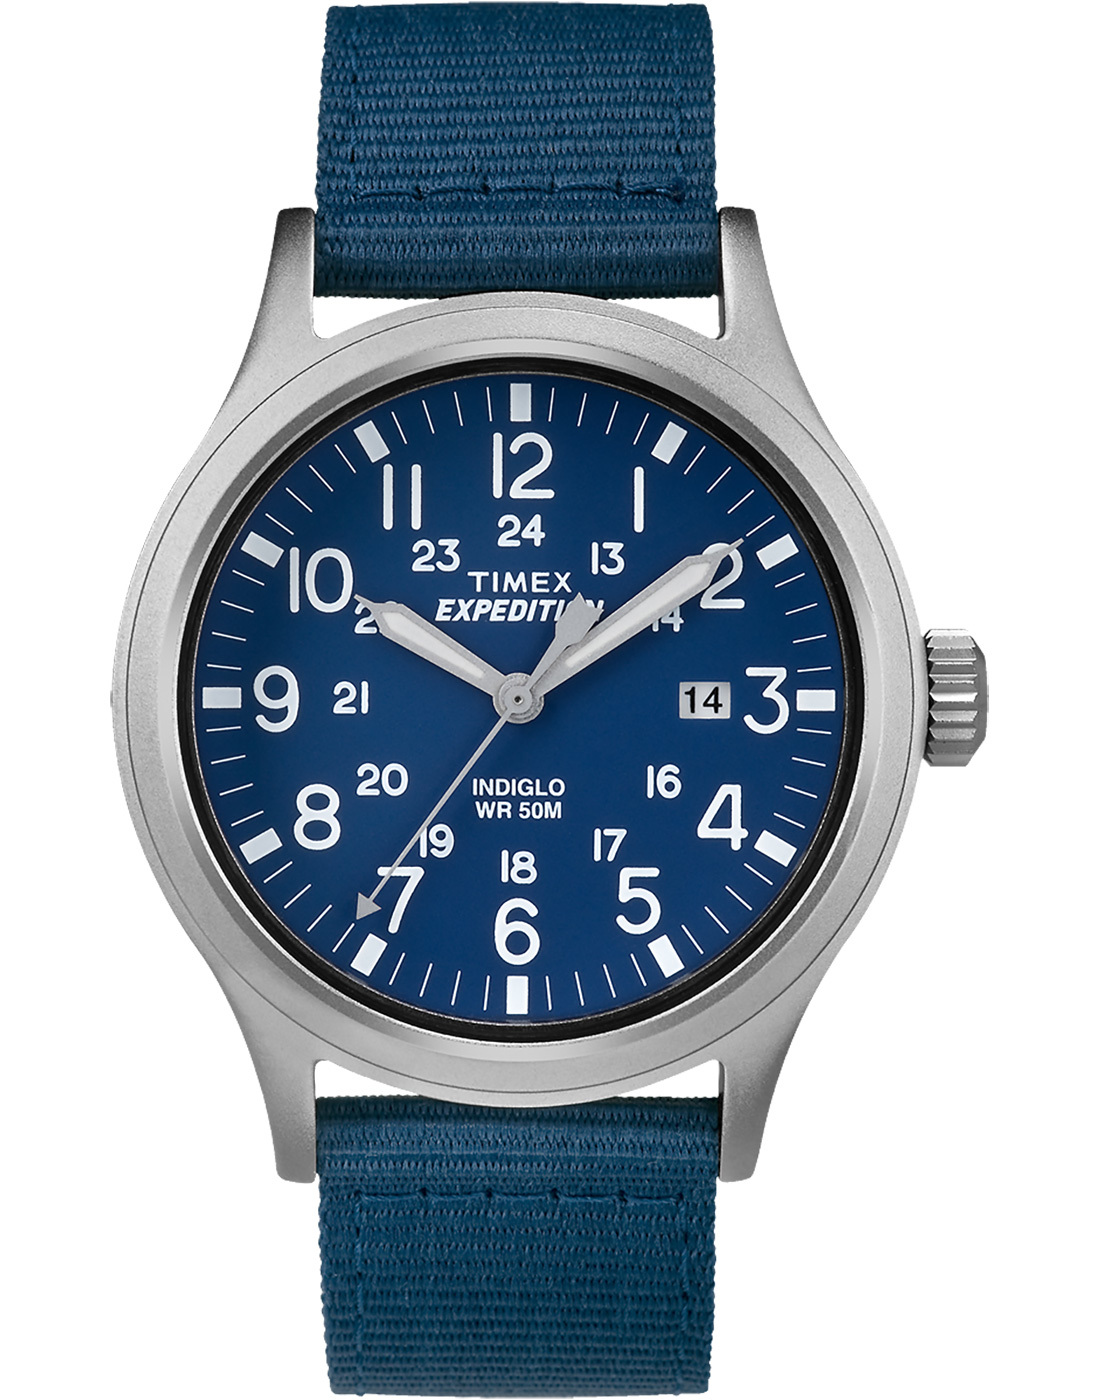 Expedition Scout TIMEX Retro Mod Watch